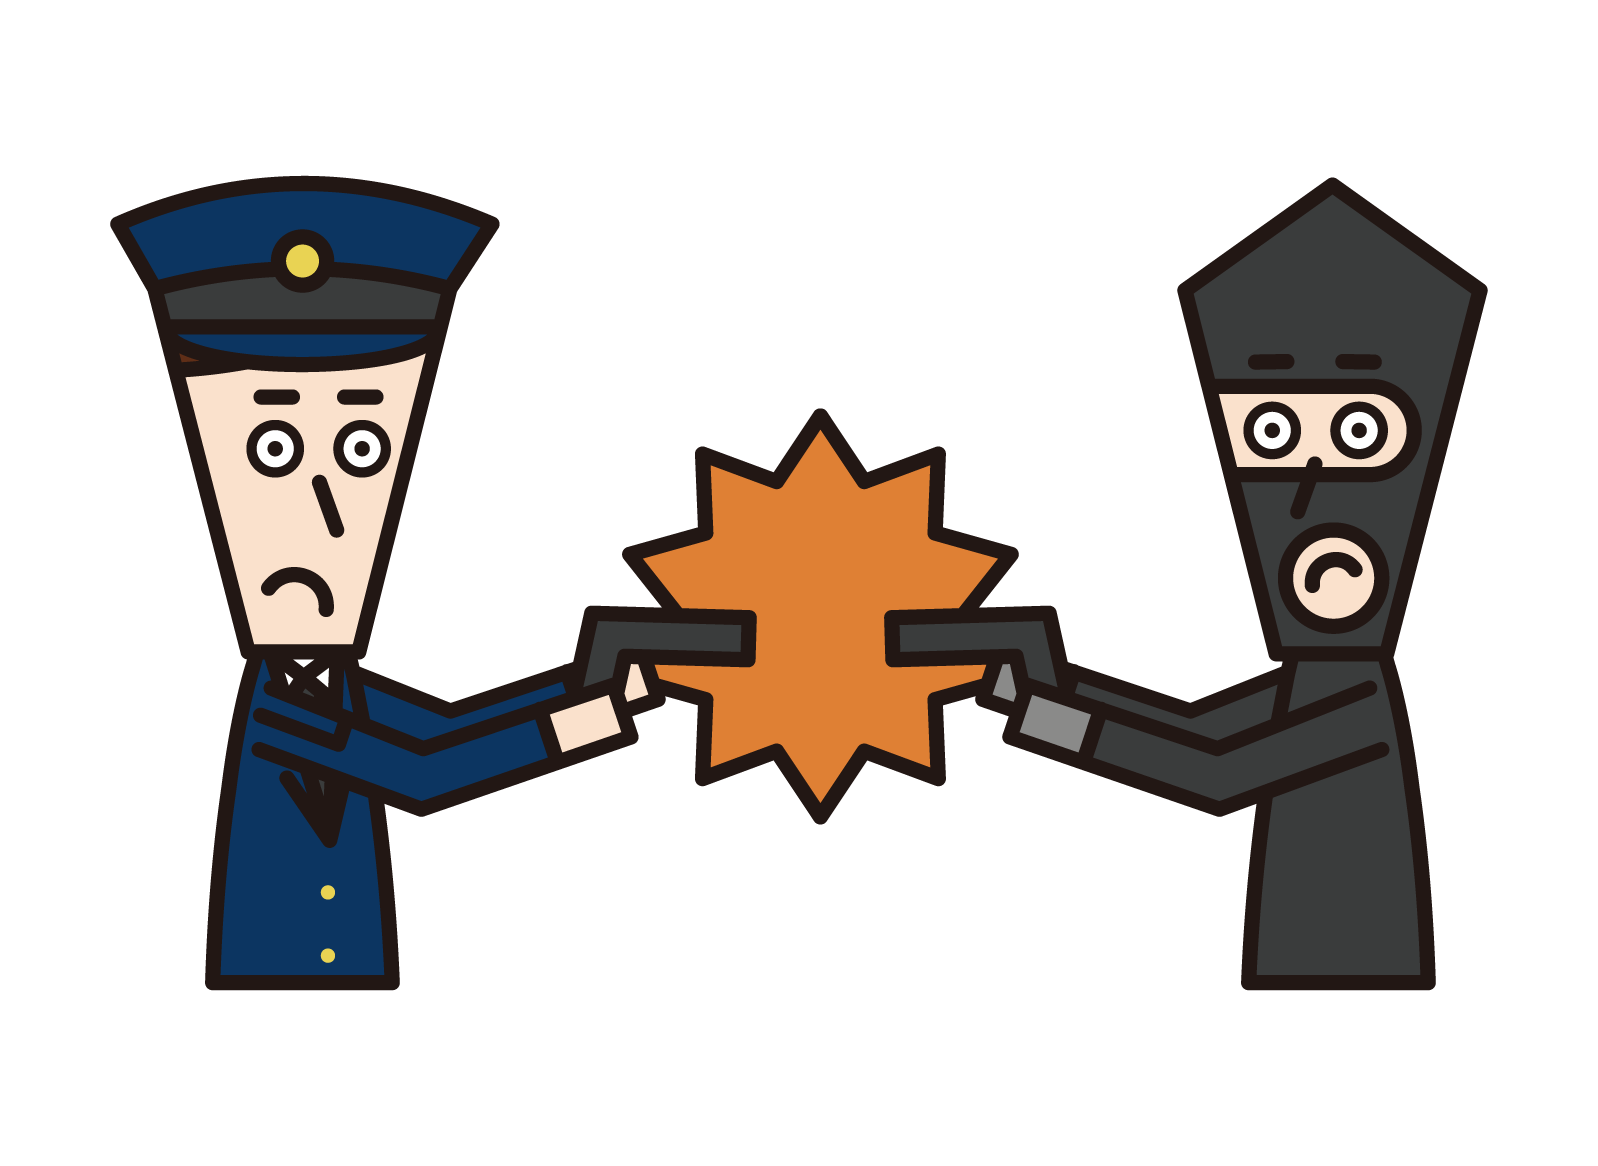 Illustration of a police officer (male) and robber (male) engaged in a shootout